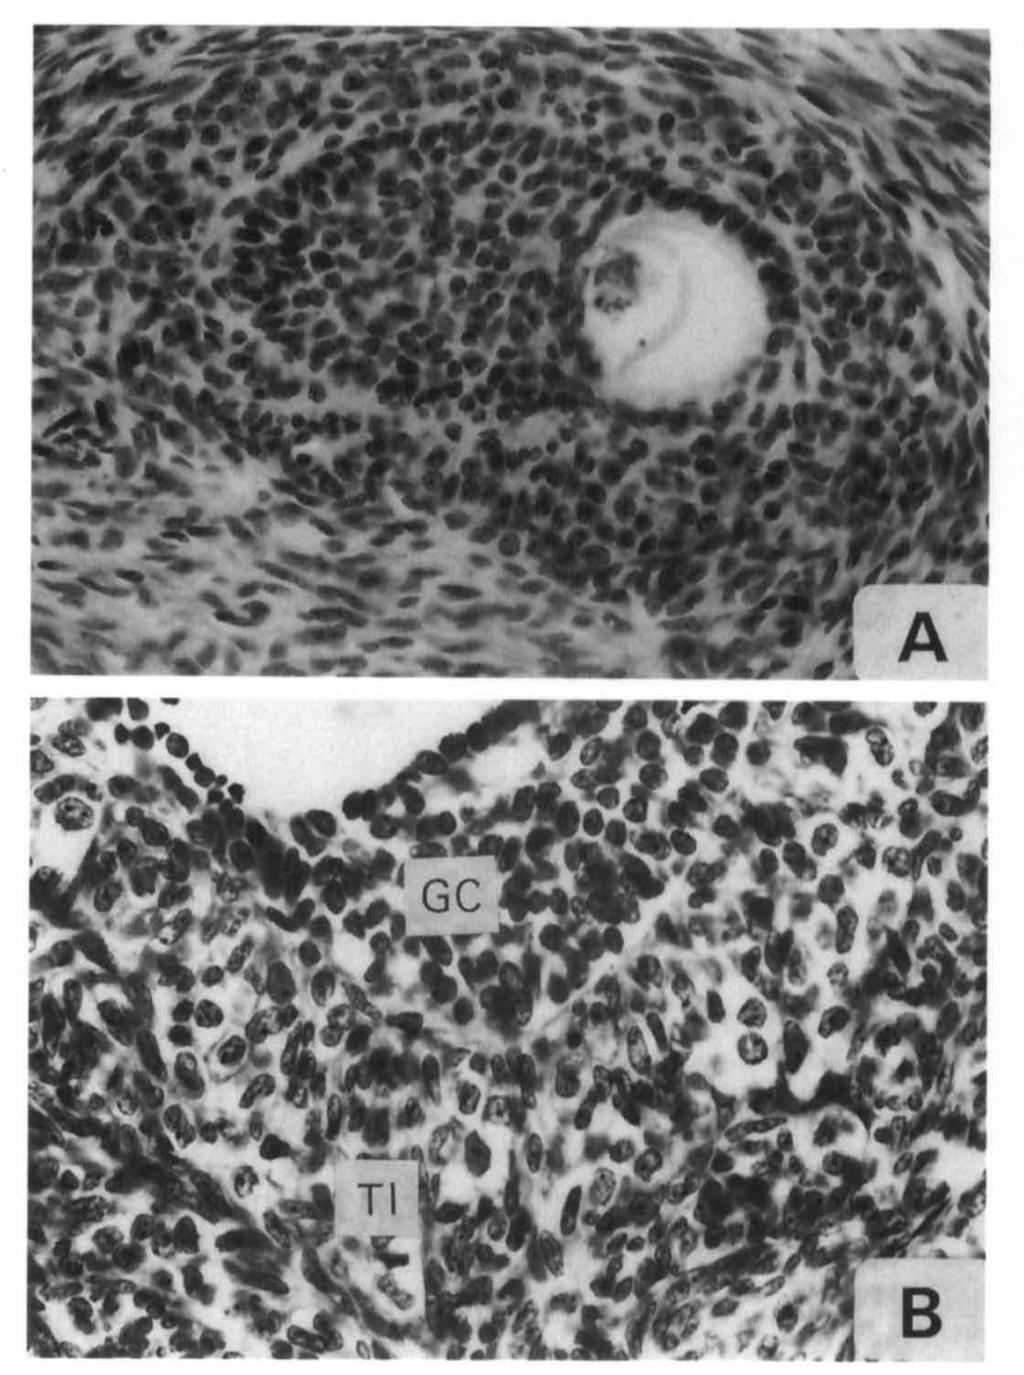 TI has changed into an interstitial gland, and basal lamina is thickened with a thin strip of fibroblasts in its inner part, X30, X320.